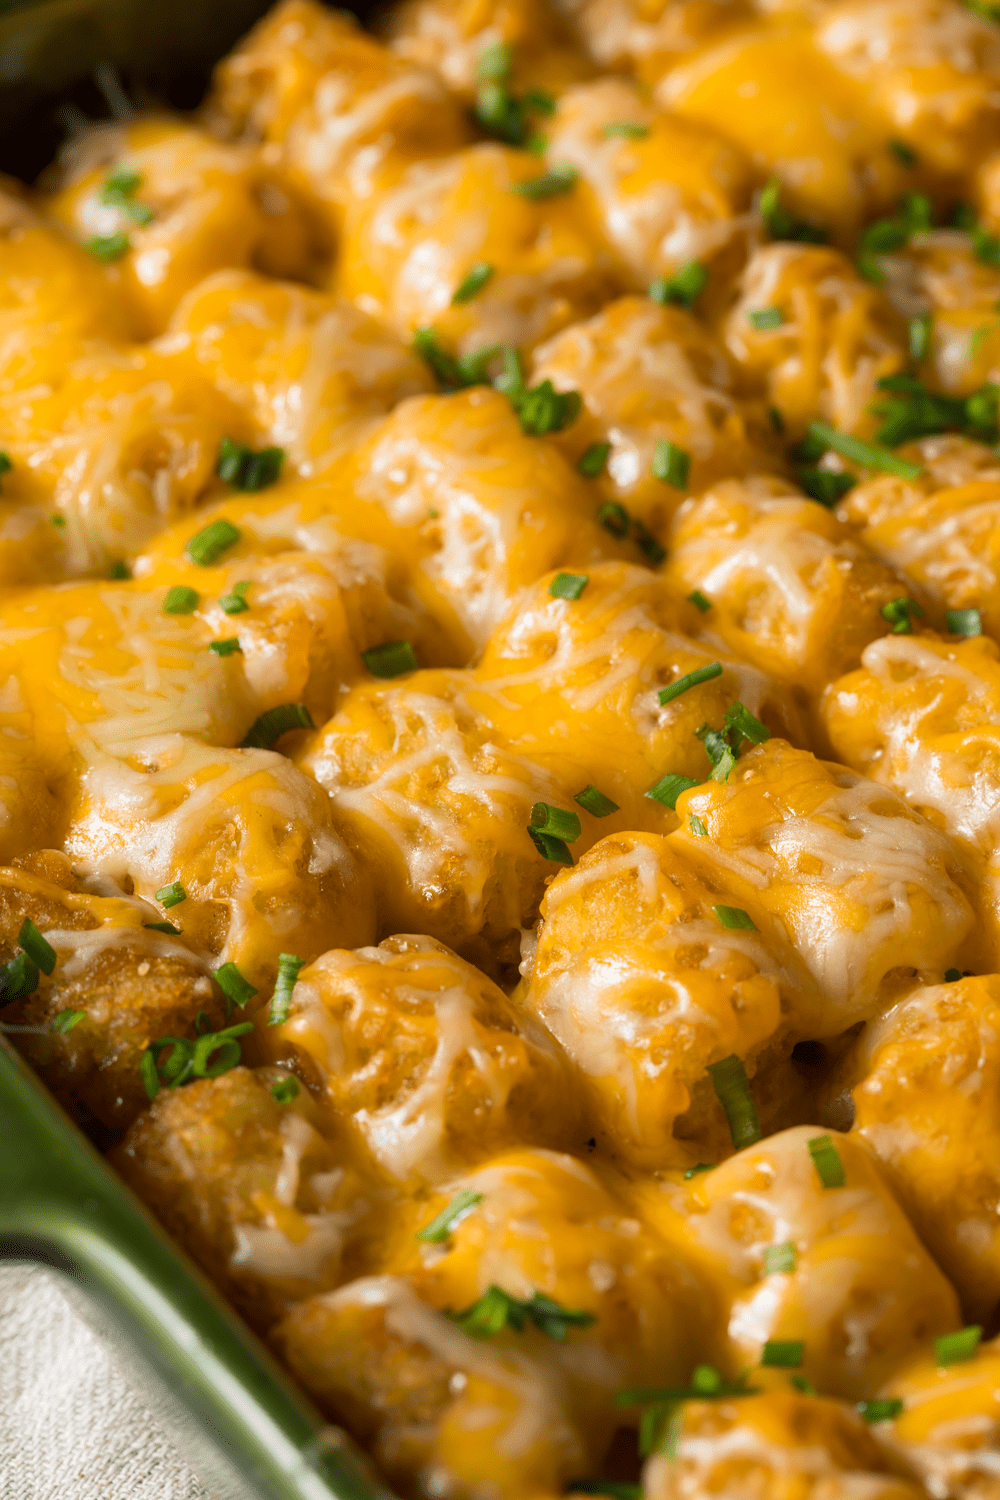 Tater Tot Casserole with Beef and Cheese